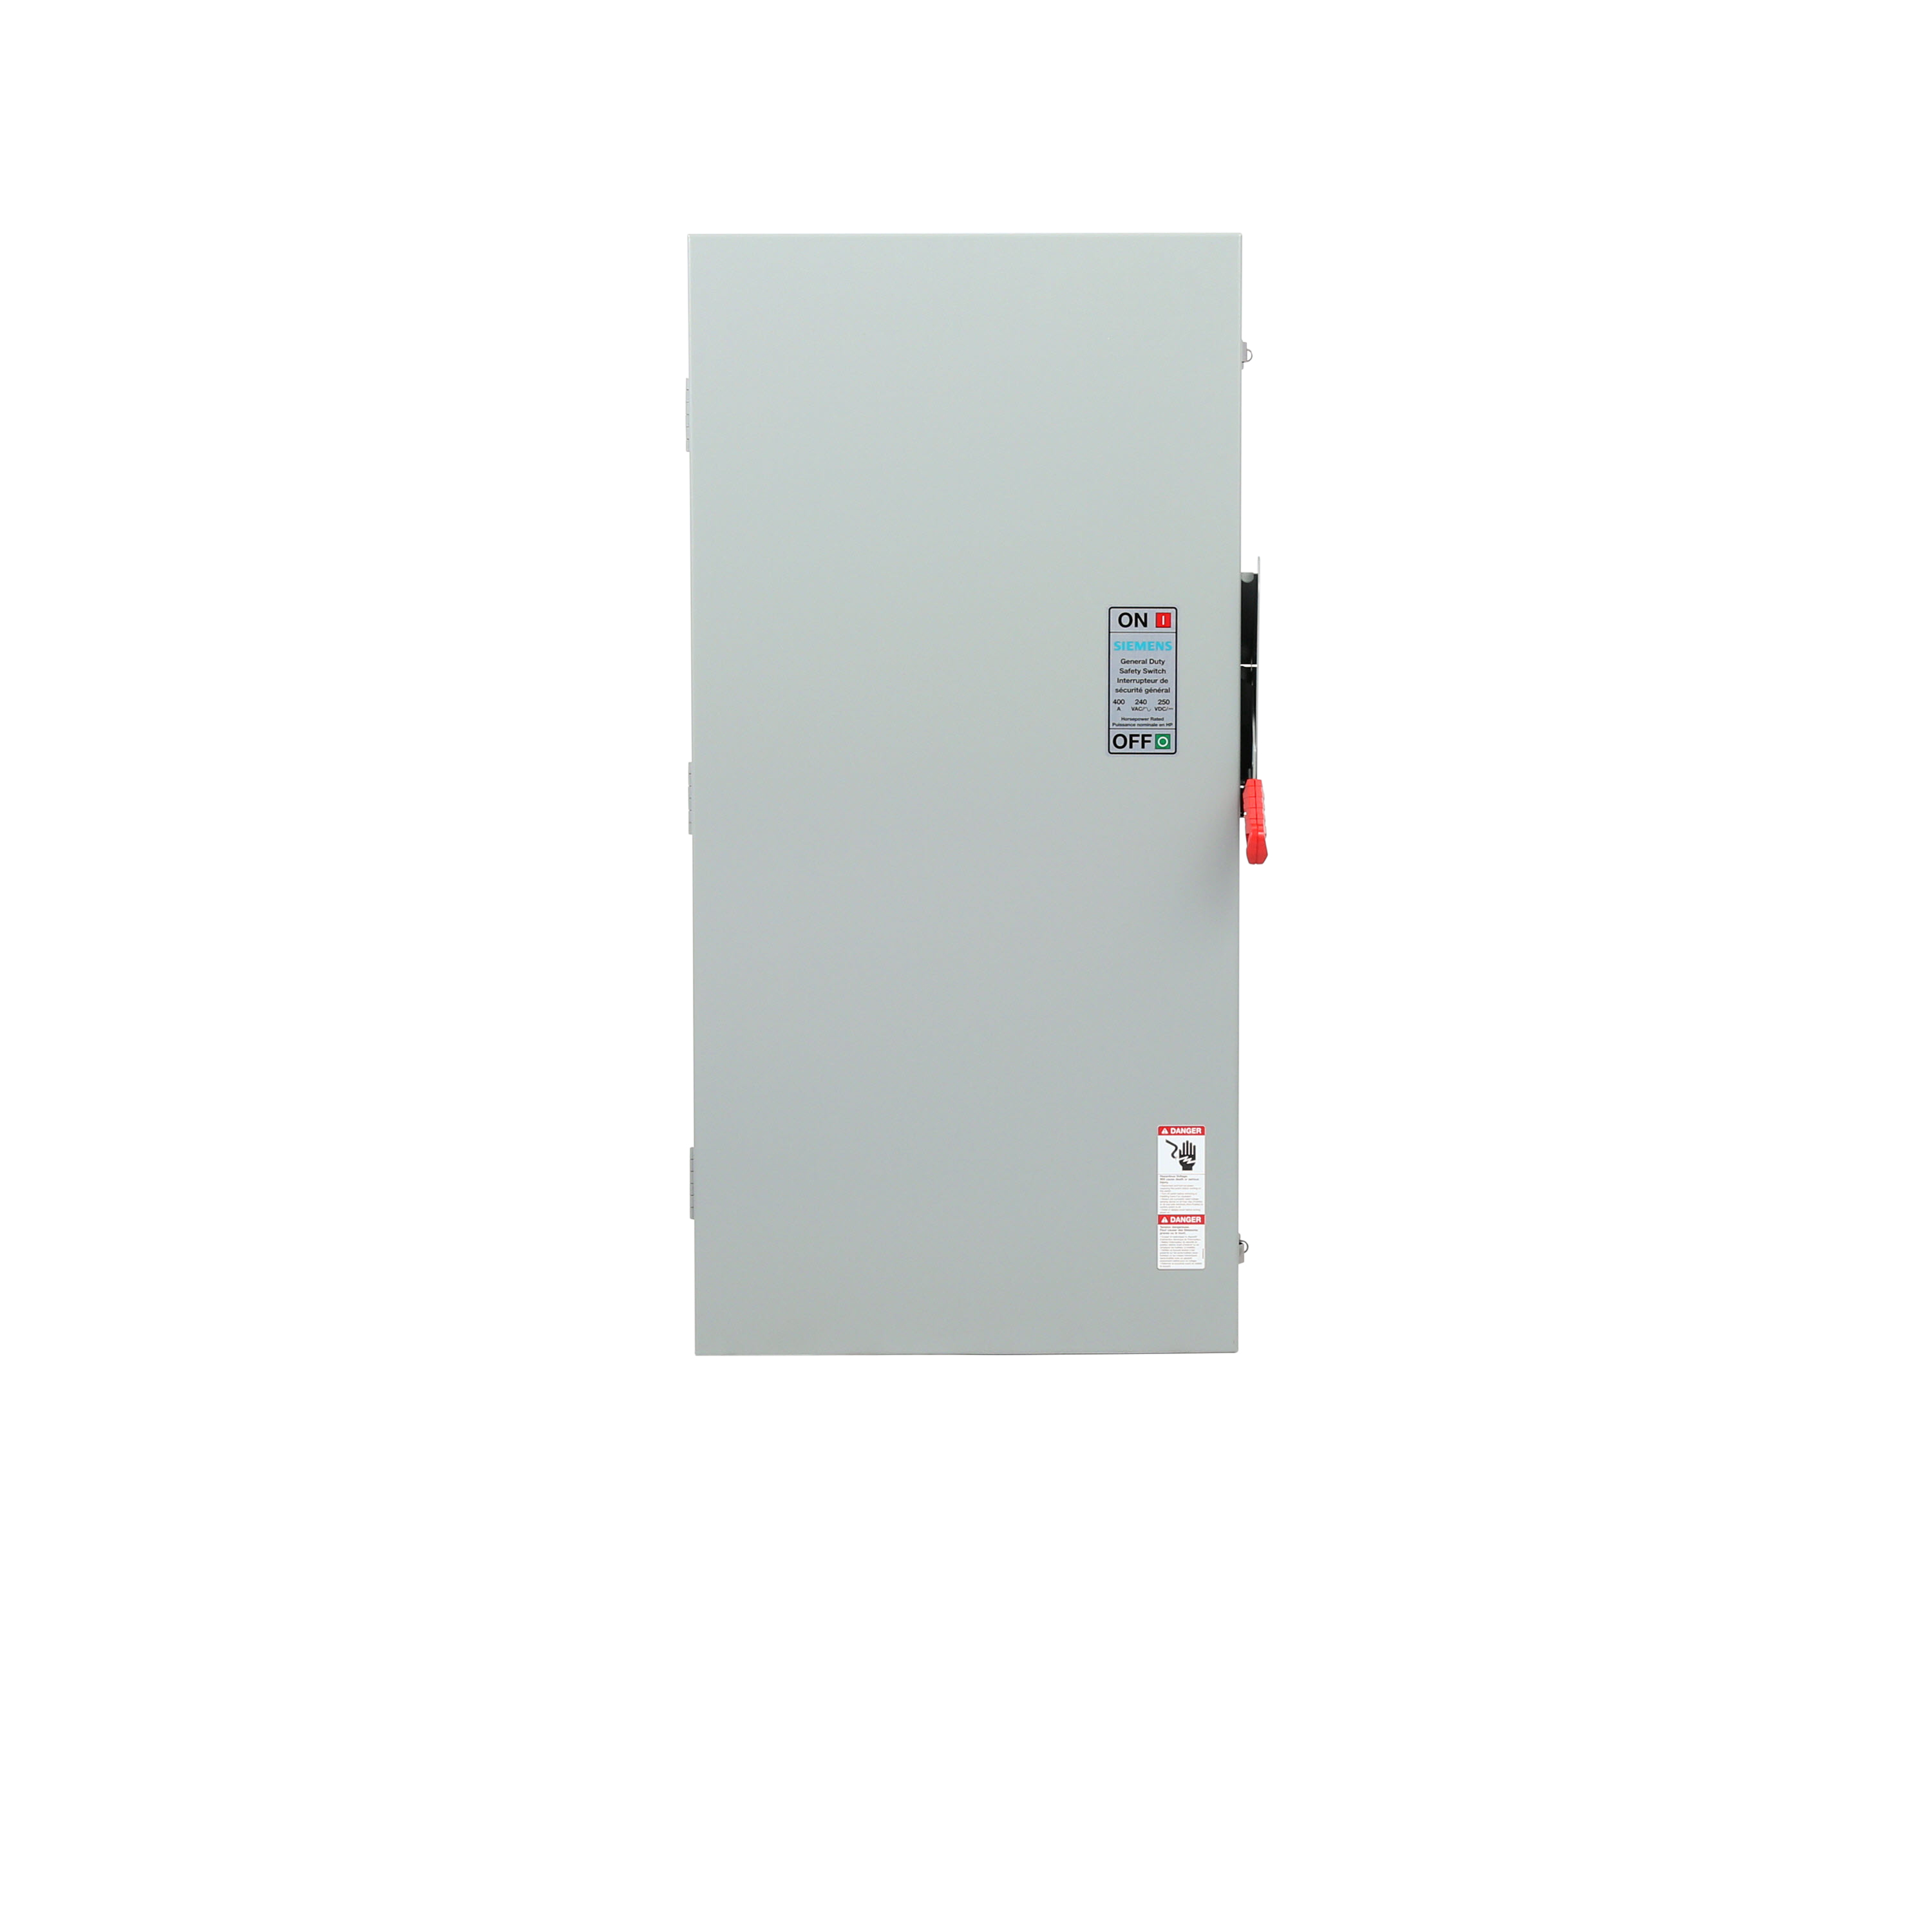 Siemens Low Voltage Circuit Protection General Duty Safety Switch. 2-Pole 2-Fuse and solid neutral Fused in a type 3R enclosure (outdoor). Rated 240VAC (400A).Horse power (Std, Time delay) fused 1-PH 2-W (15, - ), 3-PH 3-W (50, 125), 250VDC (50). Special features service entrance labeled suitable for 3-PH motor loads.